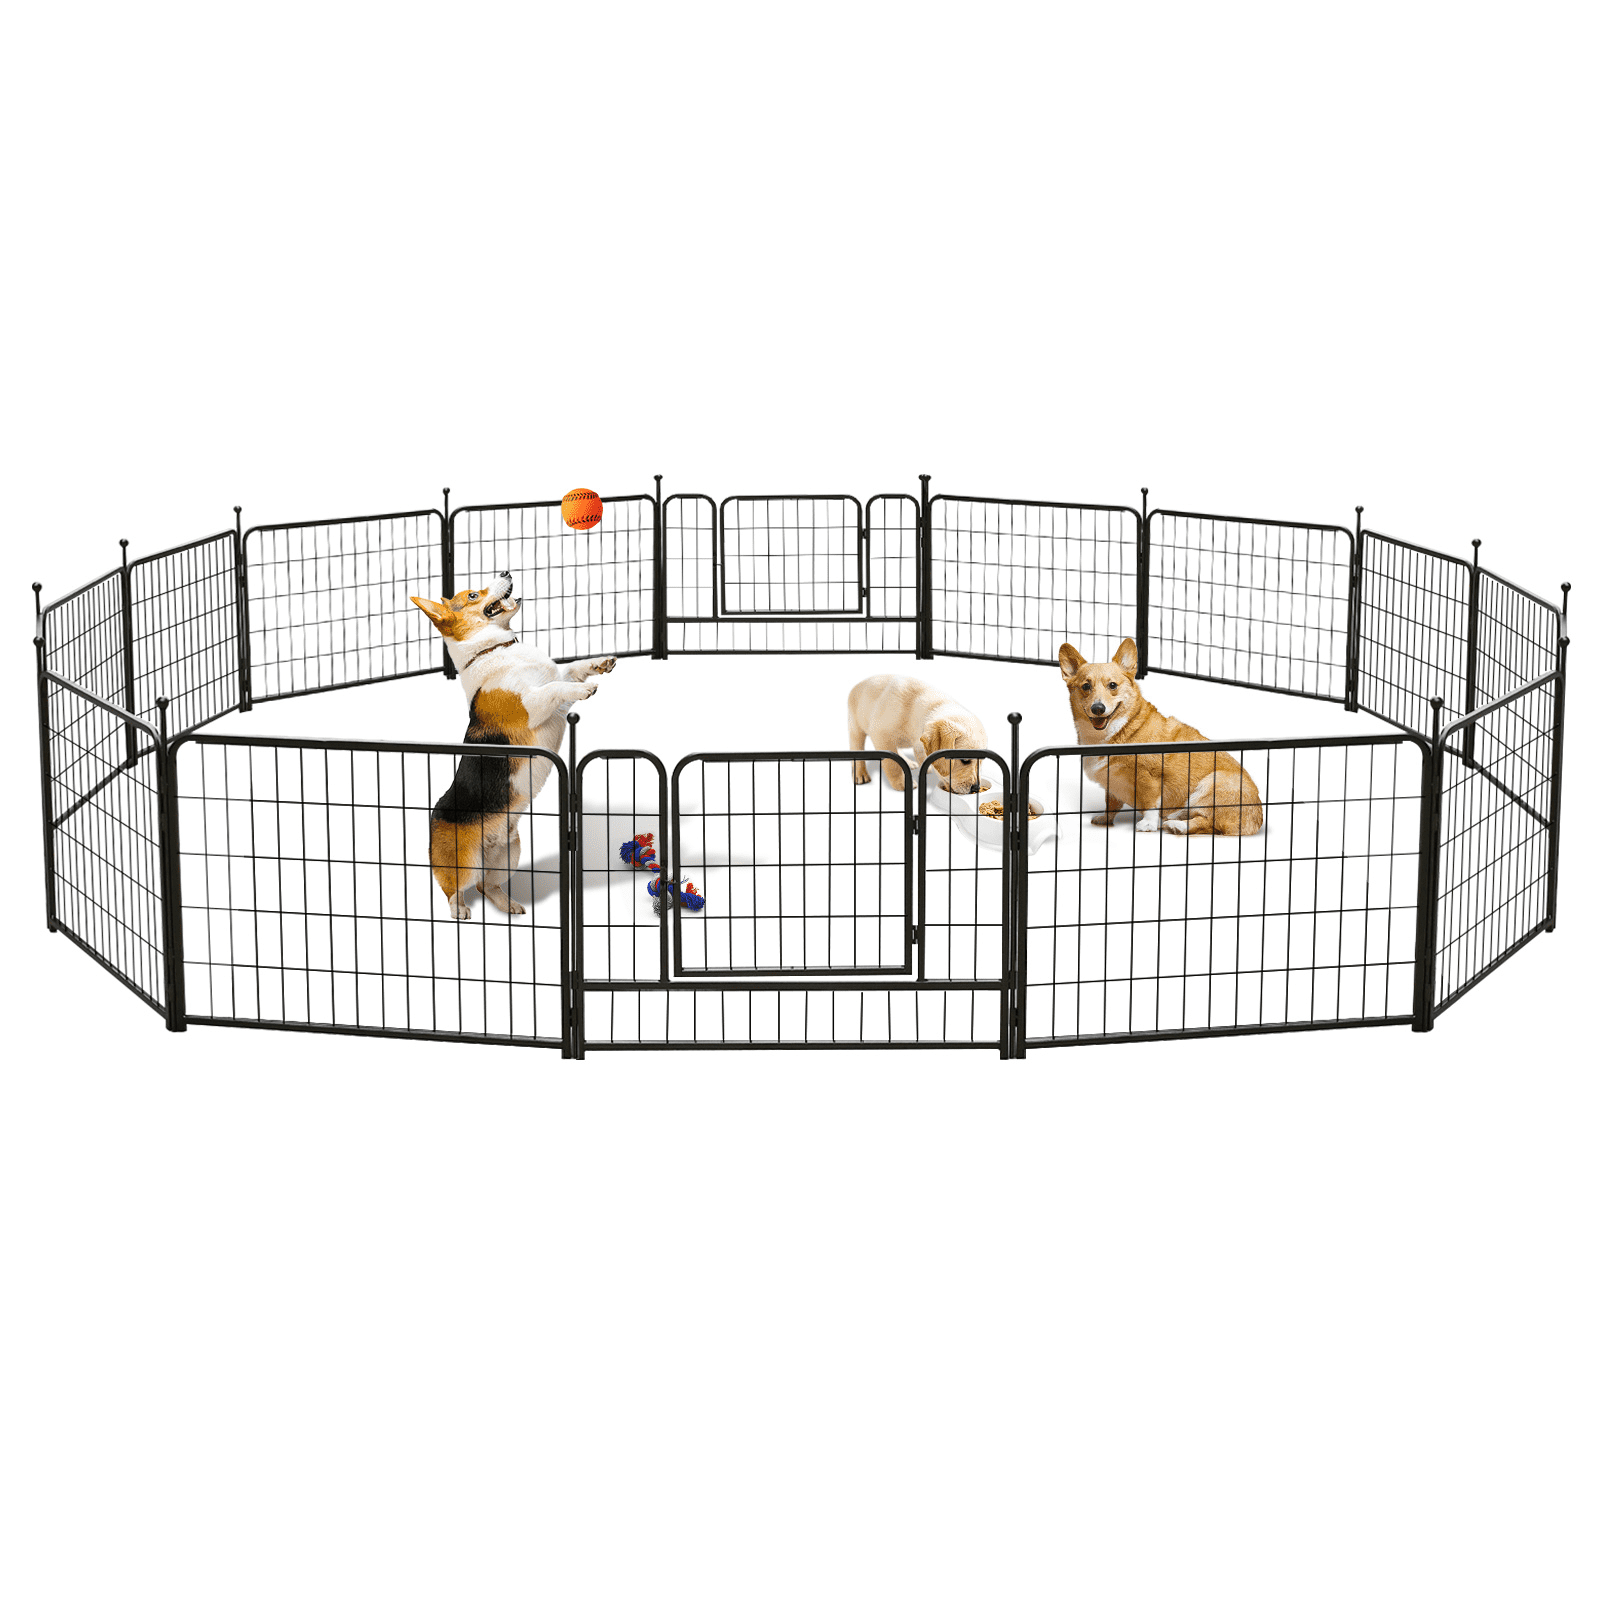 Greenbay Foldable Metal Puppy Play Pen 8 Panel Dog Rabbit Cats Playpen Small Animals Enclosure 30 Inch